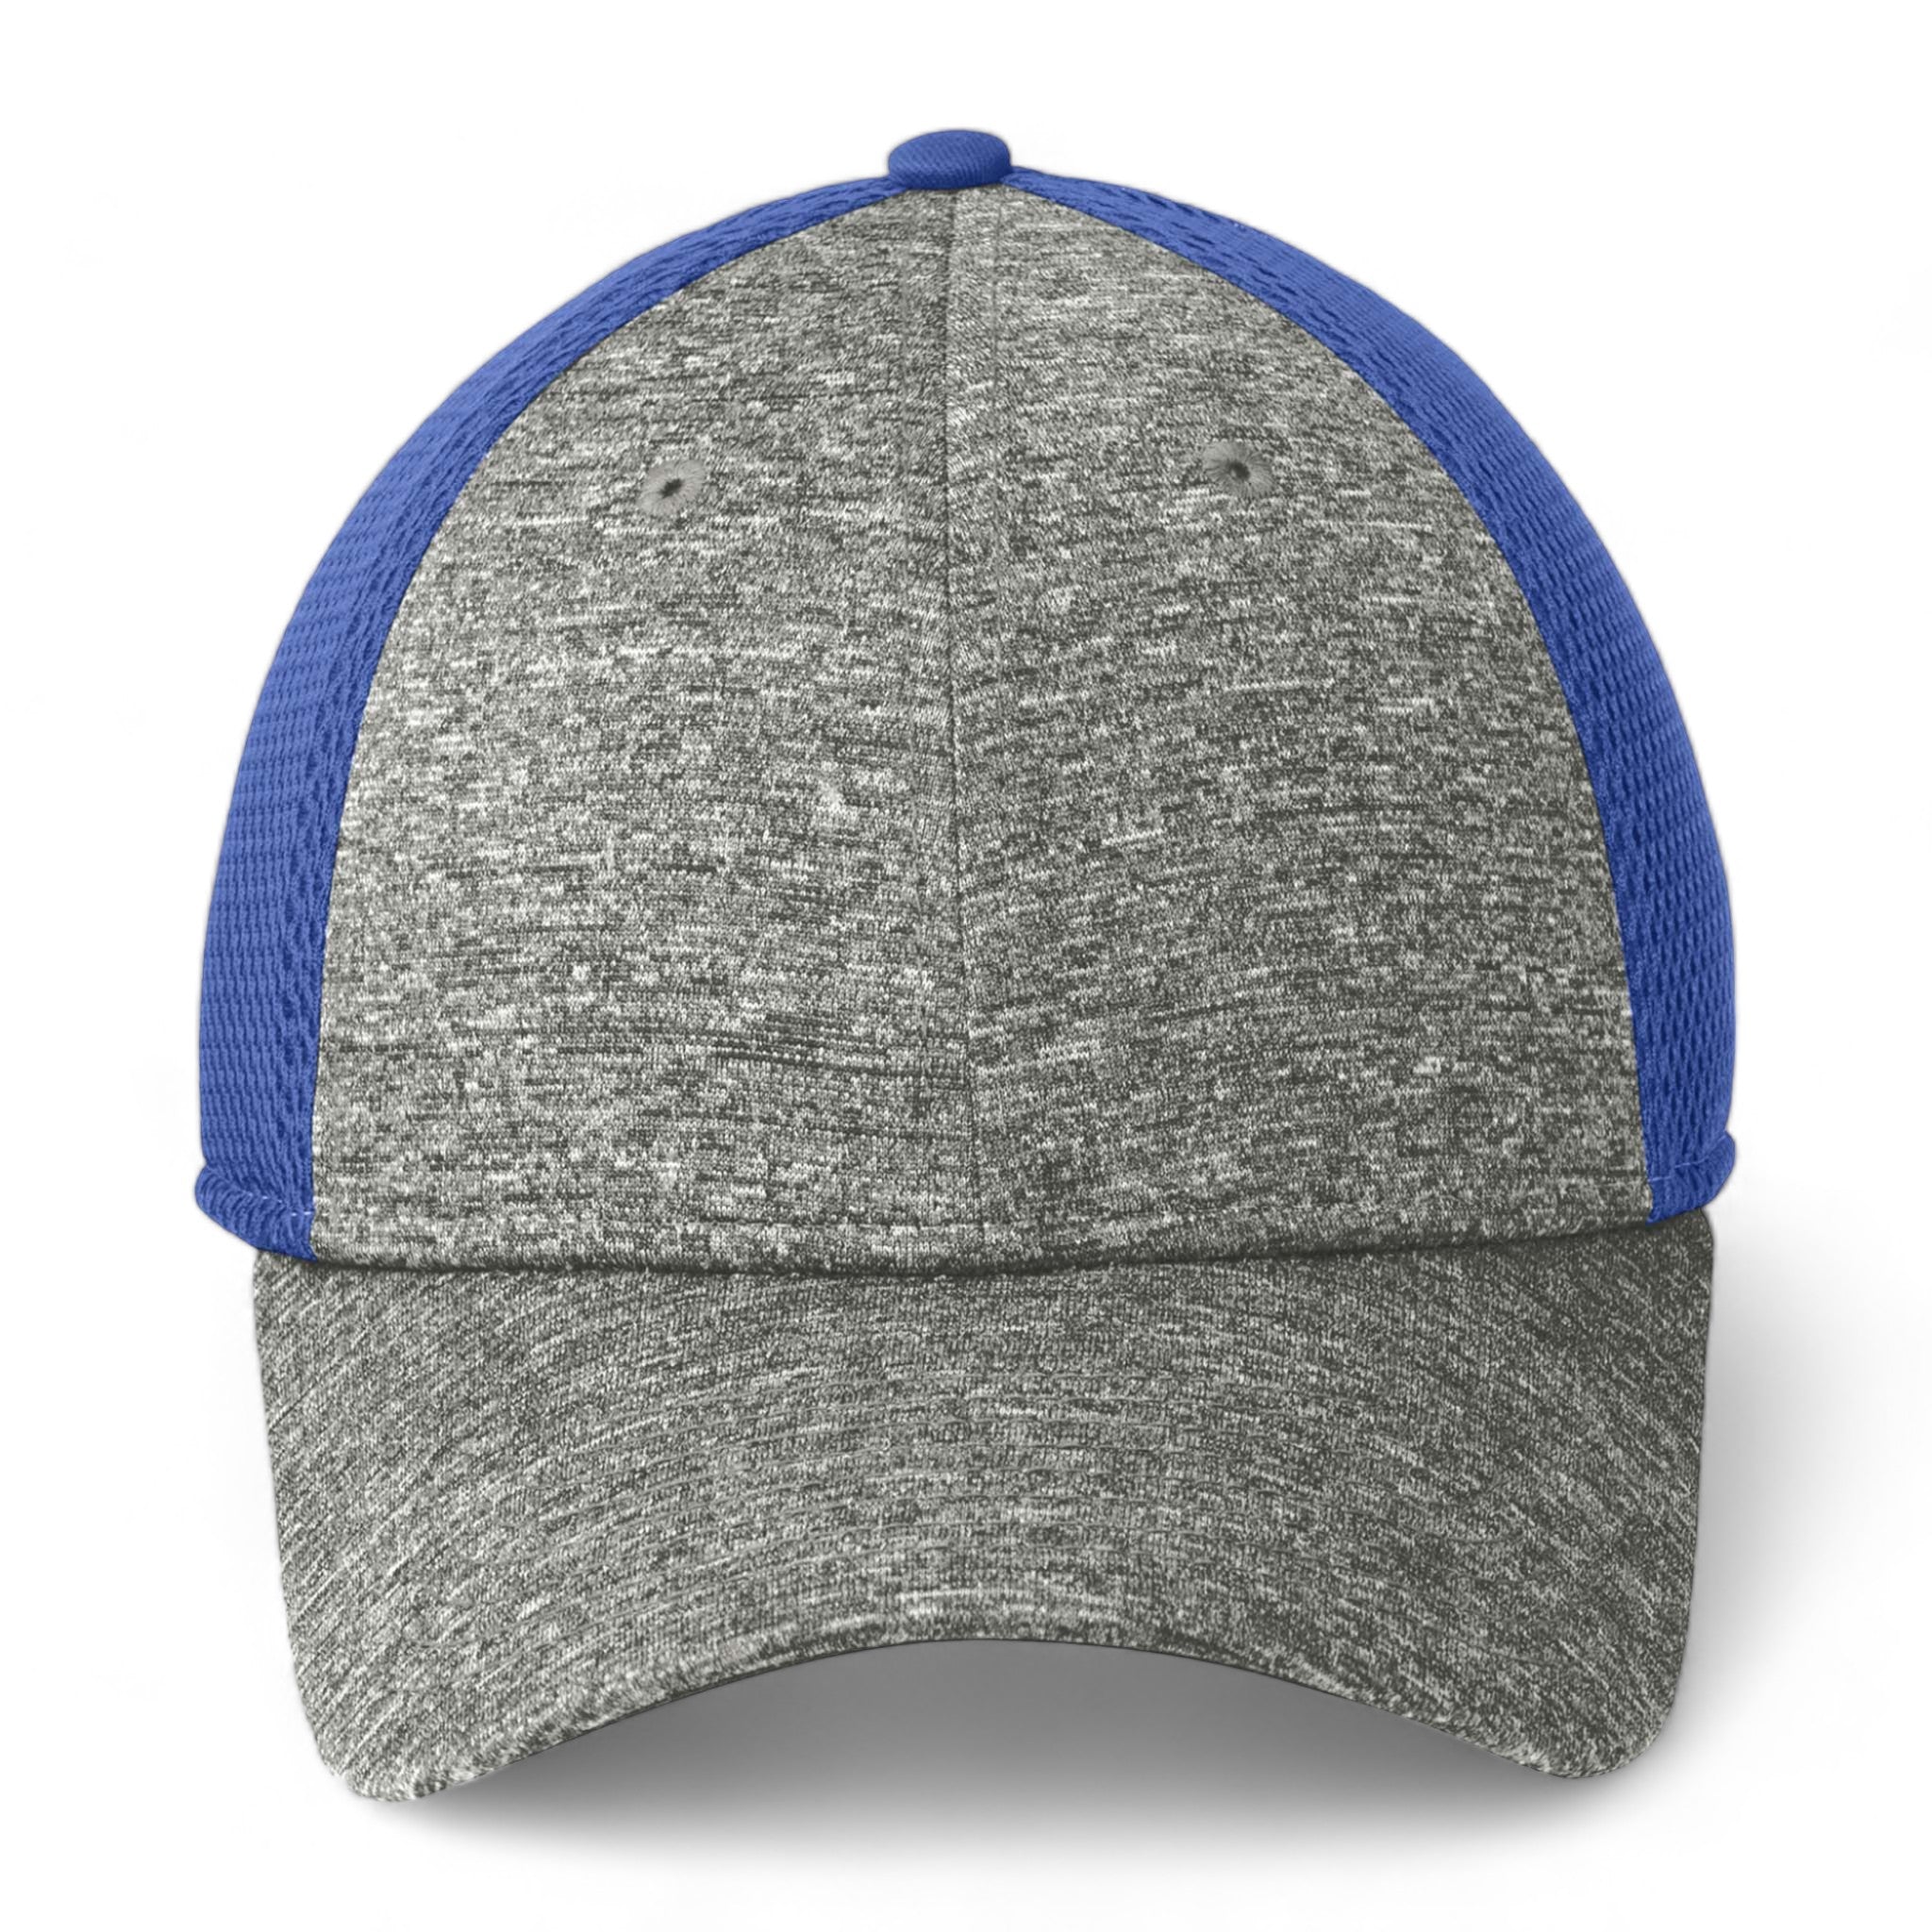 Front view of New Era NE702 custom hat in royal and shadow heather